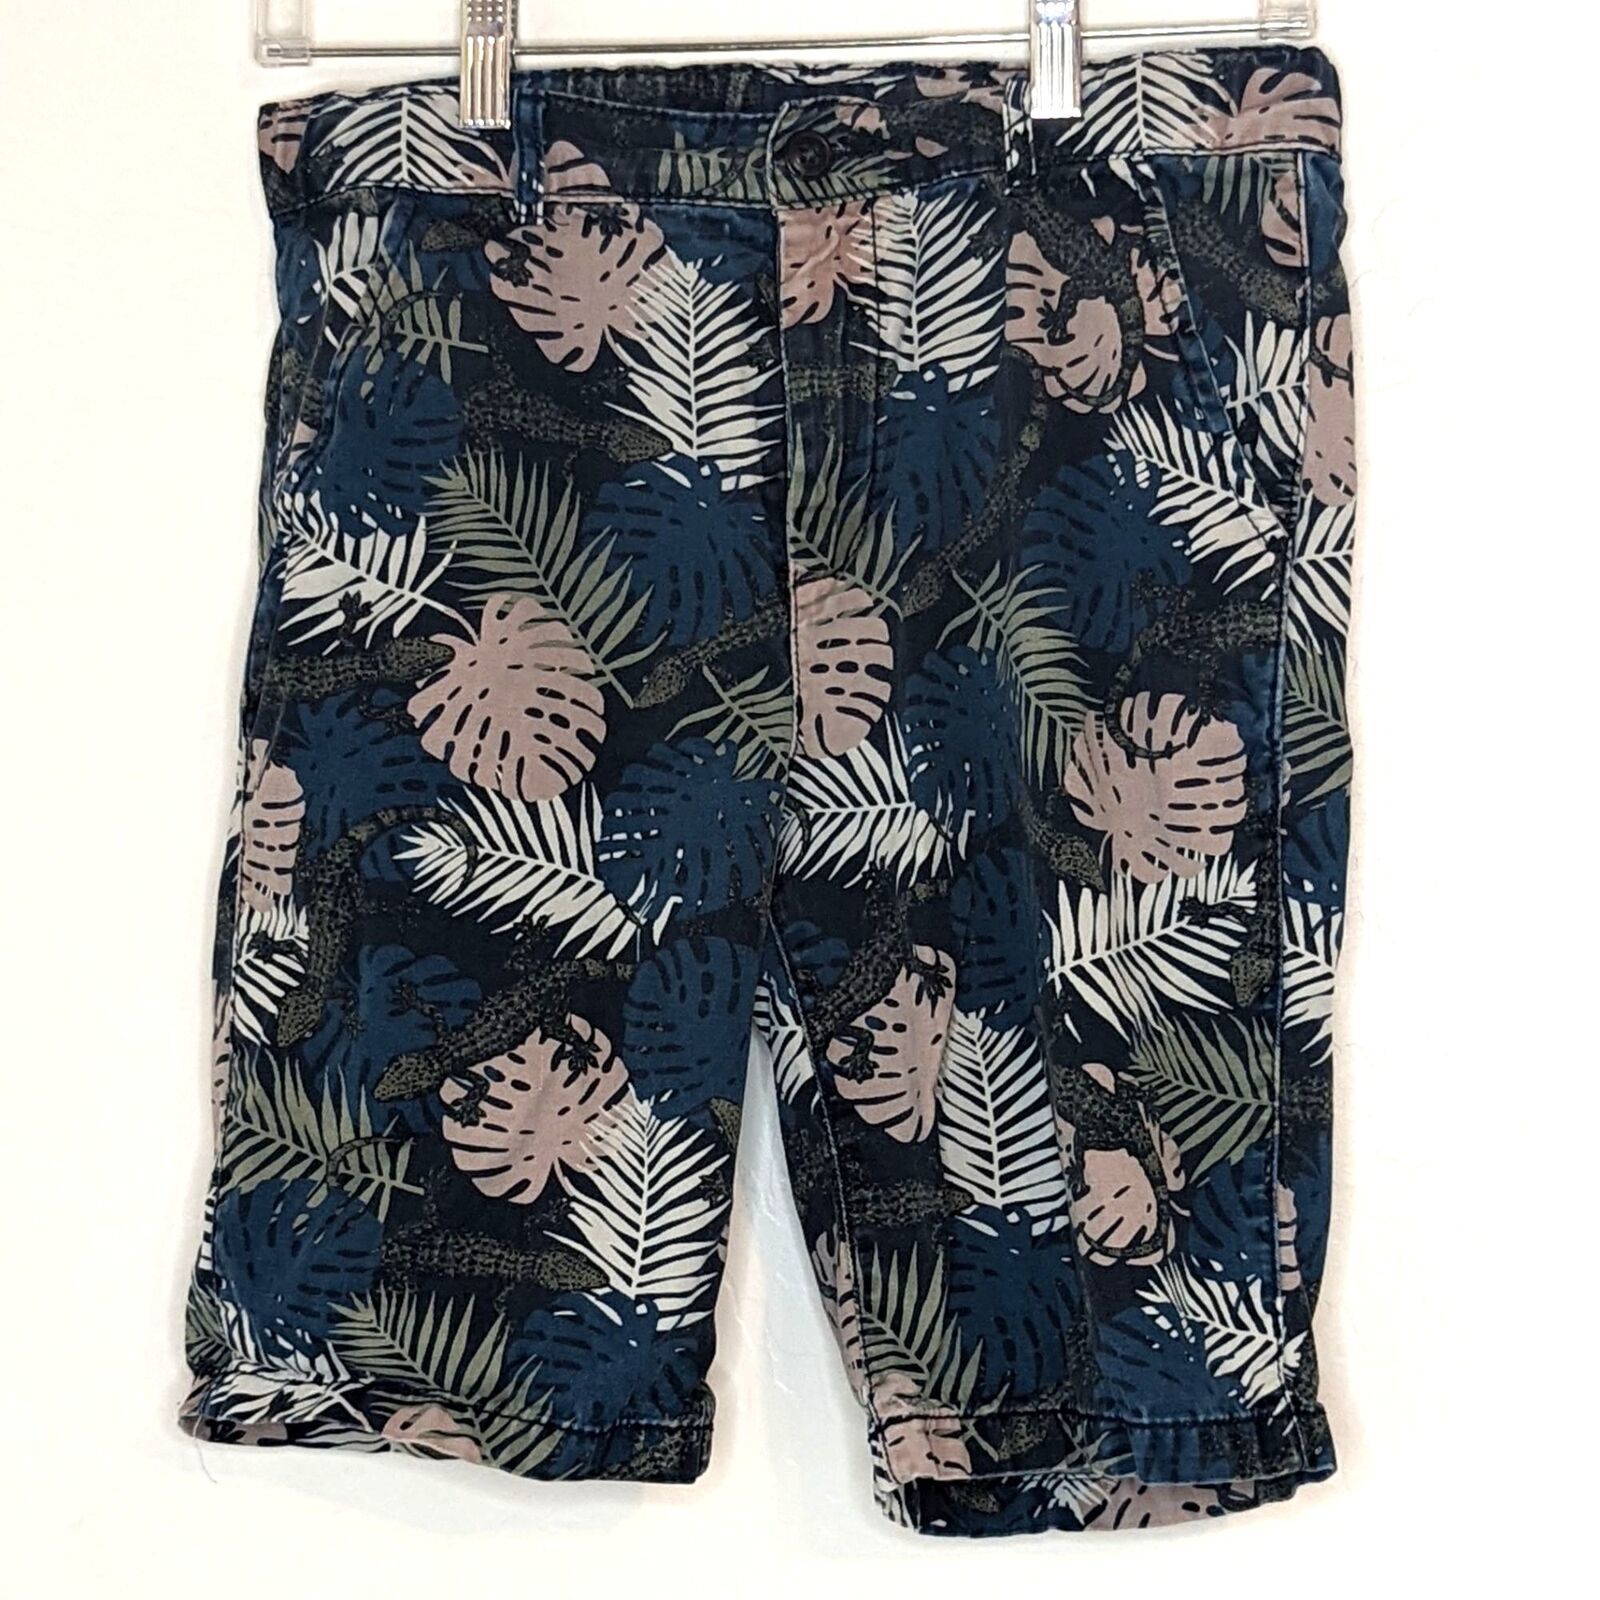 Children's Place Boys Shorts Size 14 Tropical Casual - $6.89